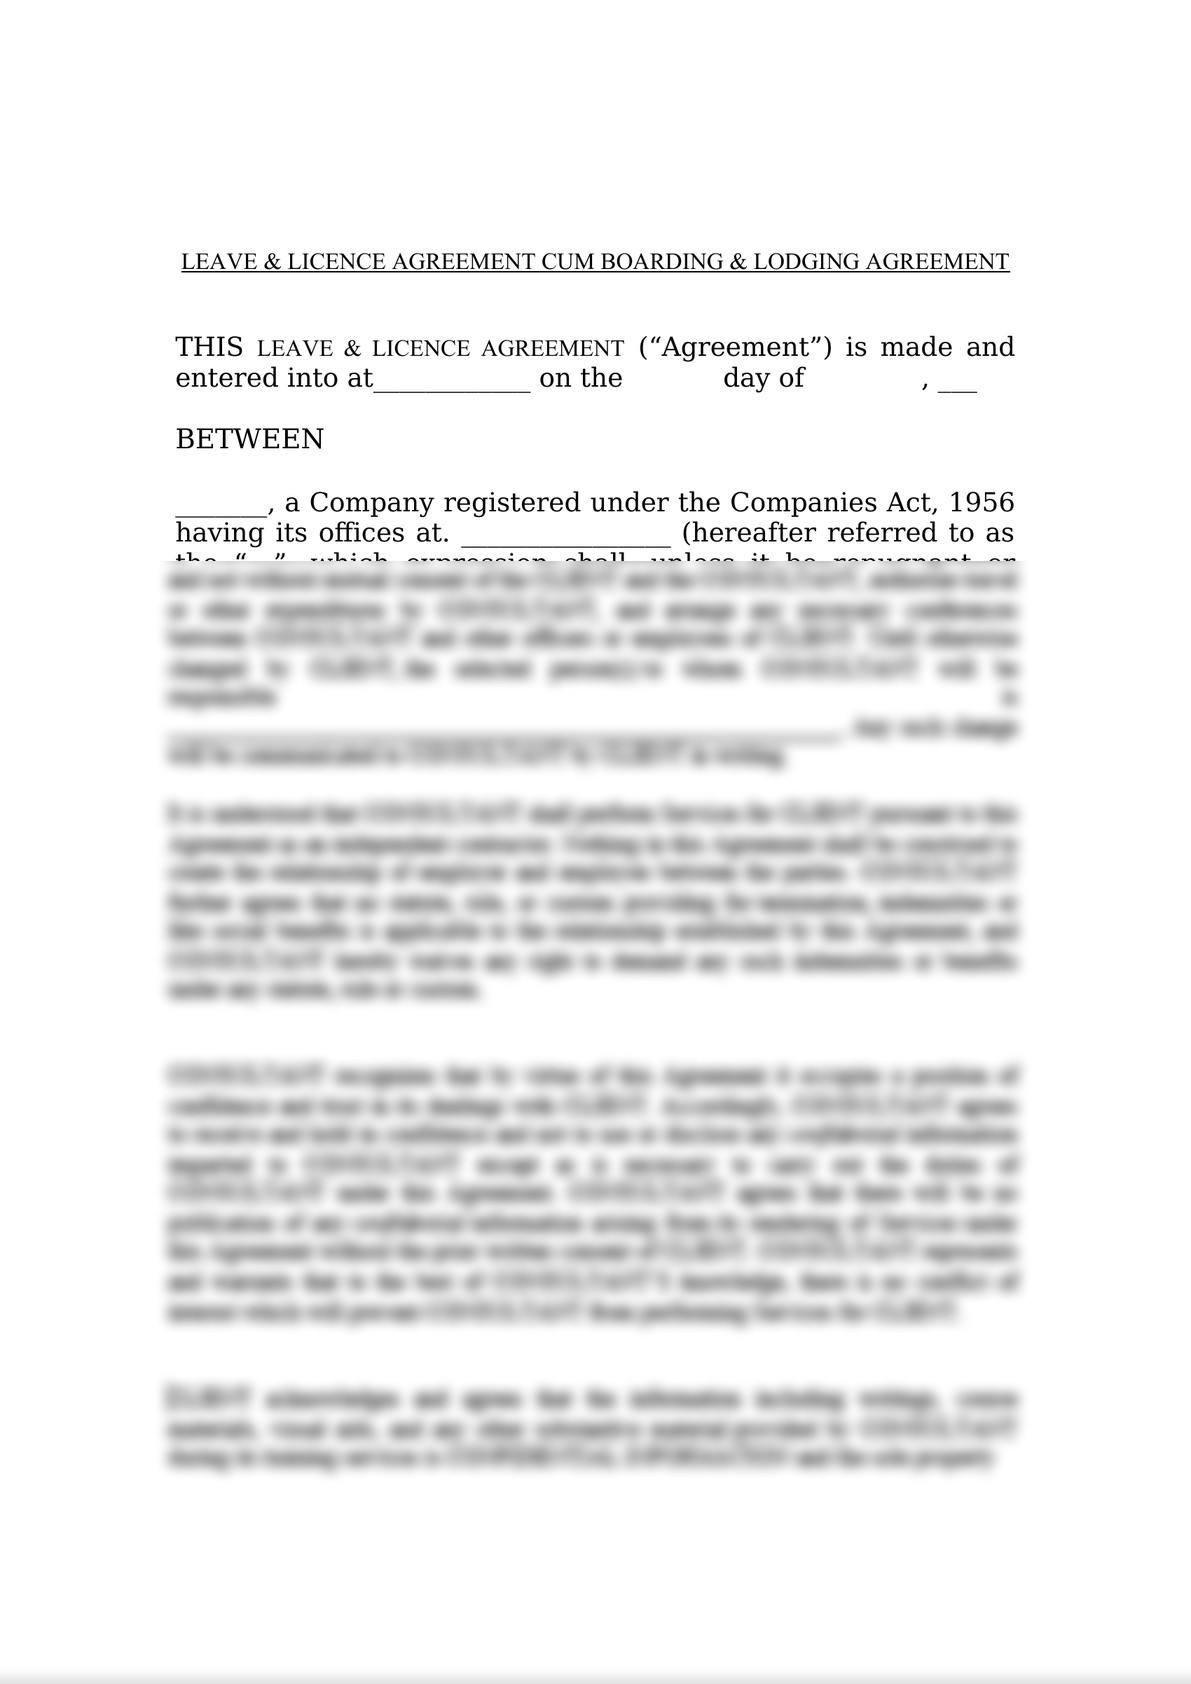 LEAVE & LICENCE AGREEMENT CUM BOARDING & LODGING AGREEMENT-0